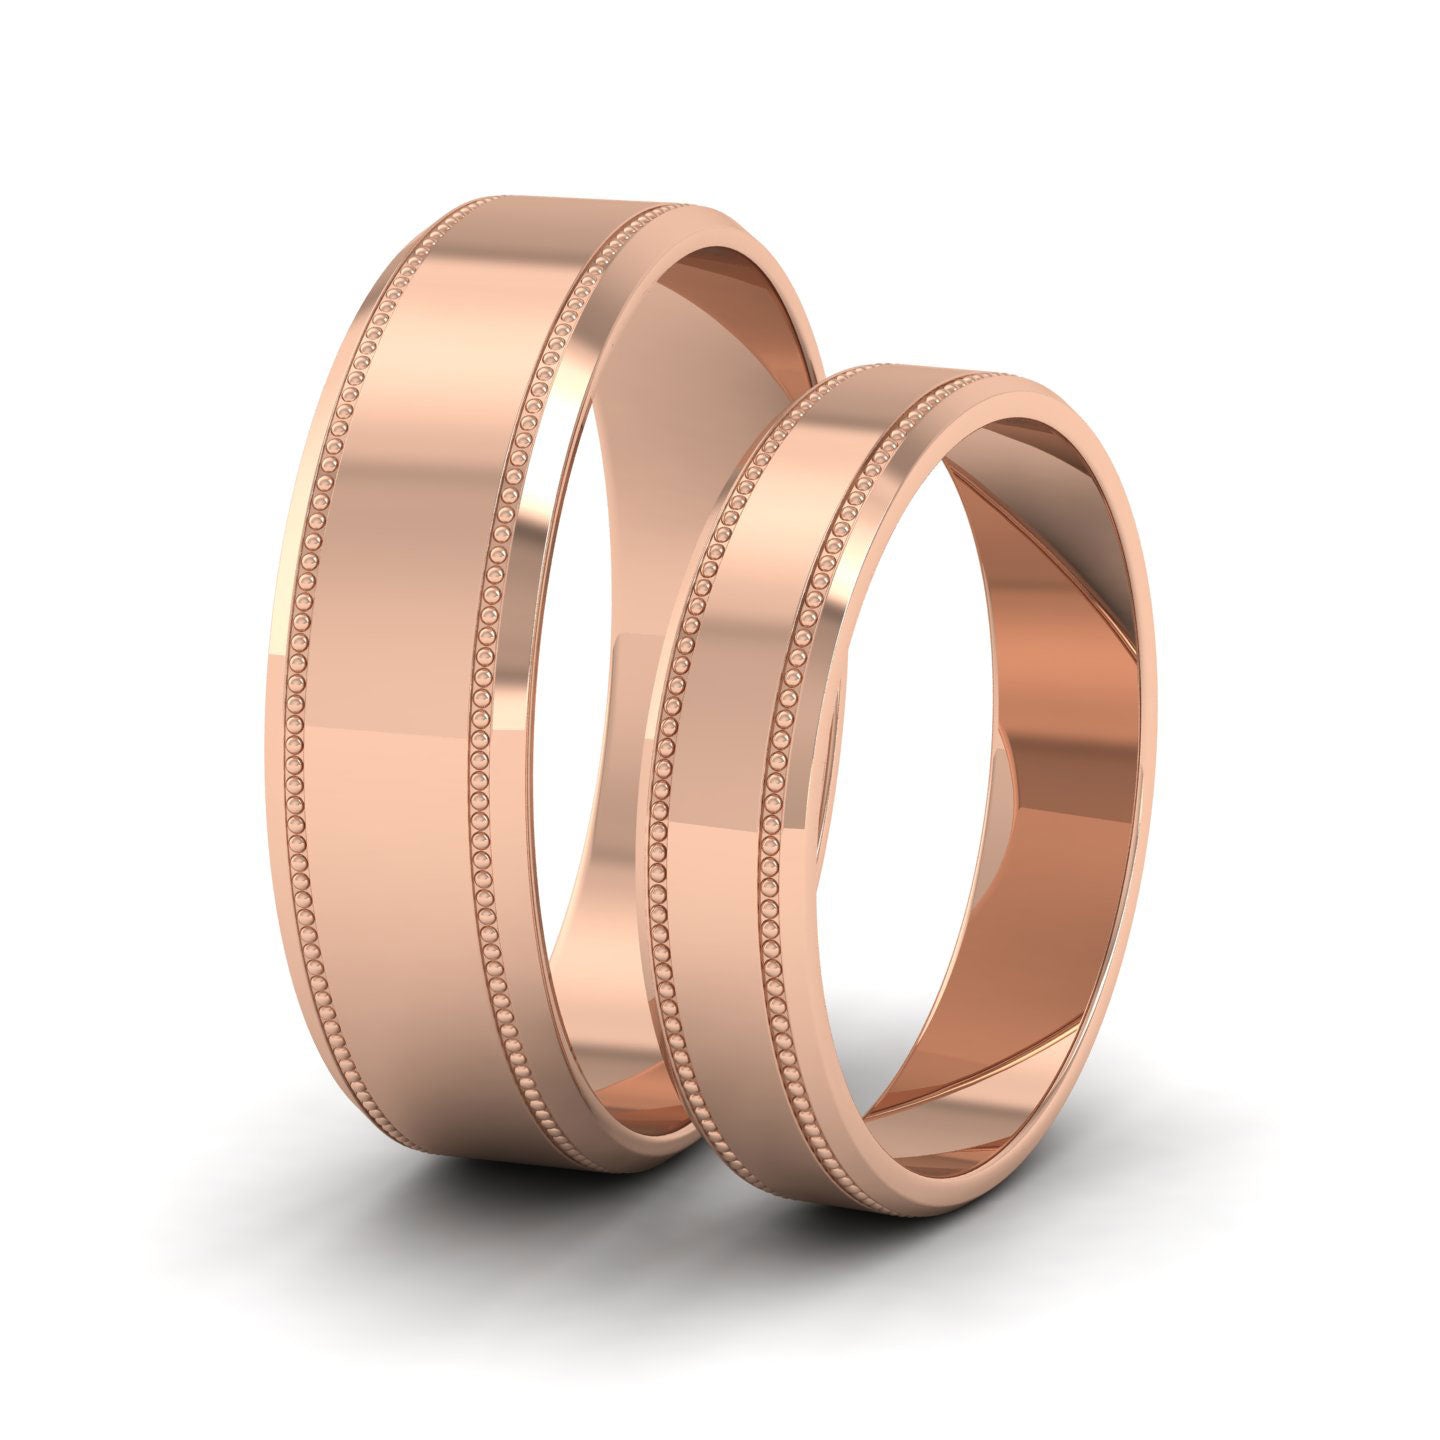 Bevelled Edge And Millgrain Pattern 9ct Rose Gold 4mm Flat Wedding Ring